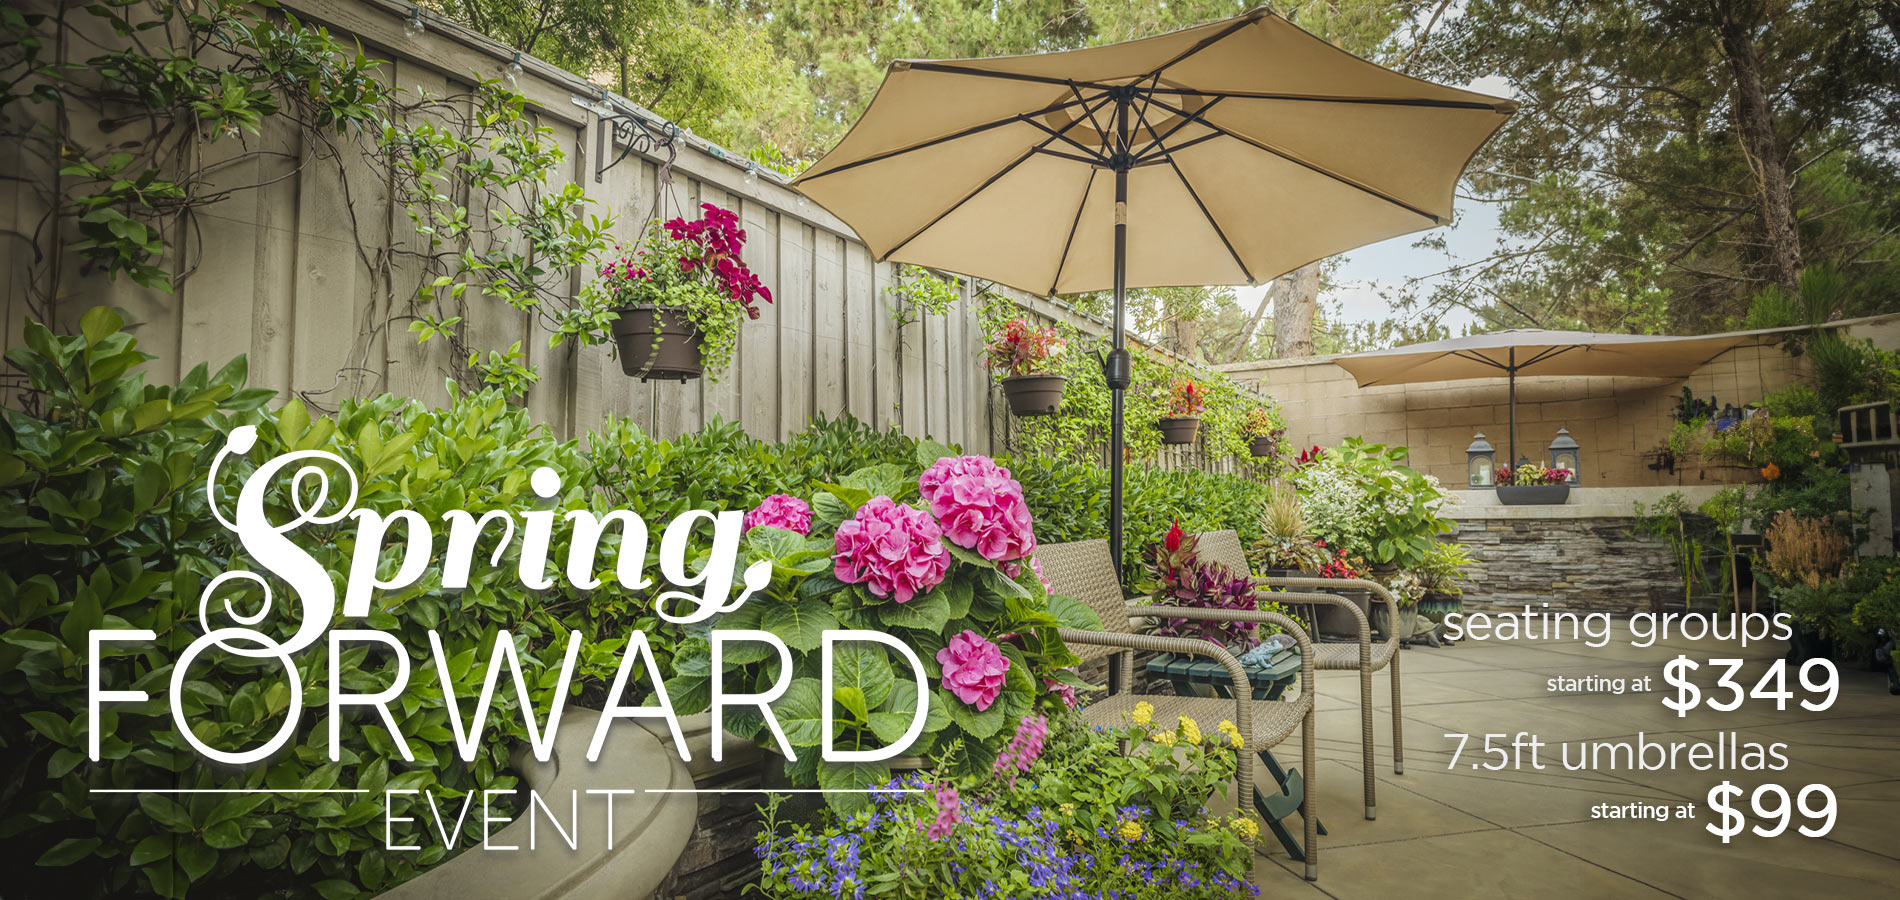 The Spring Forward Event Starts Now! Save on your dream patio, with seating groups starting at $349 and 7.5 ft umbrellas starting at $99